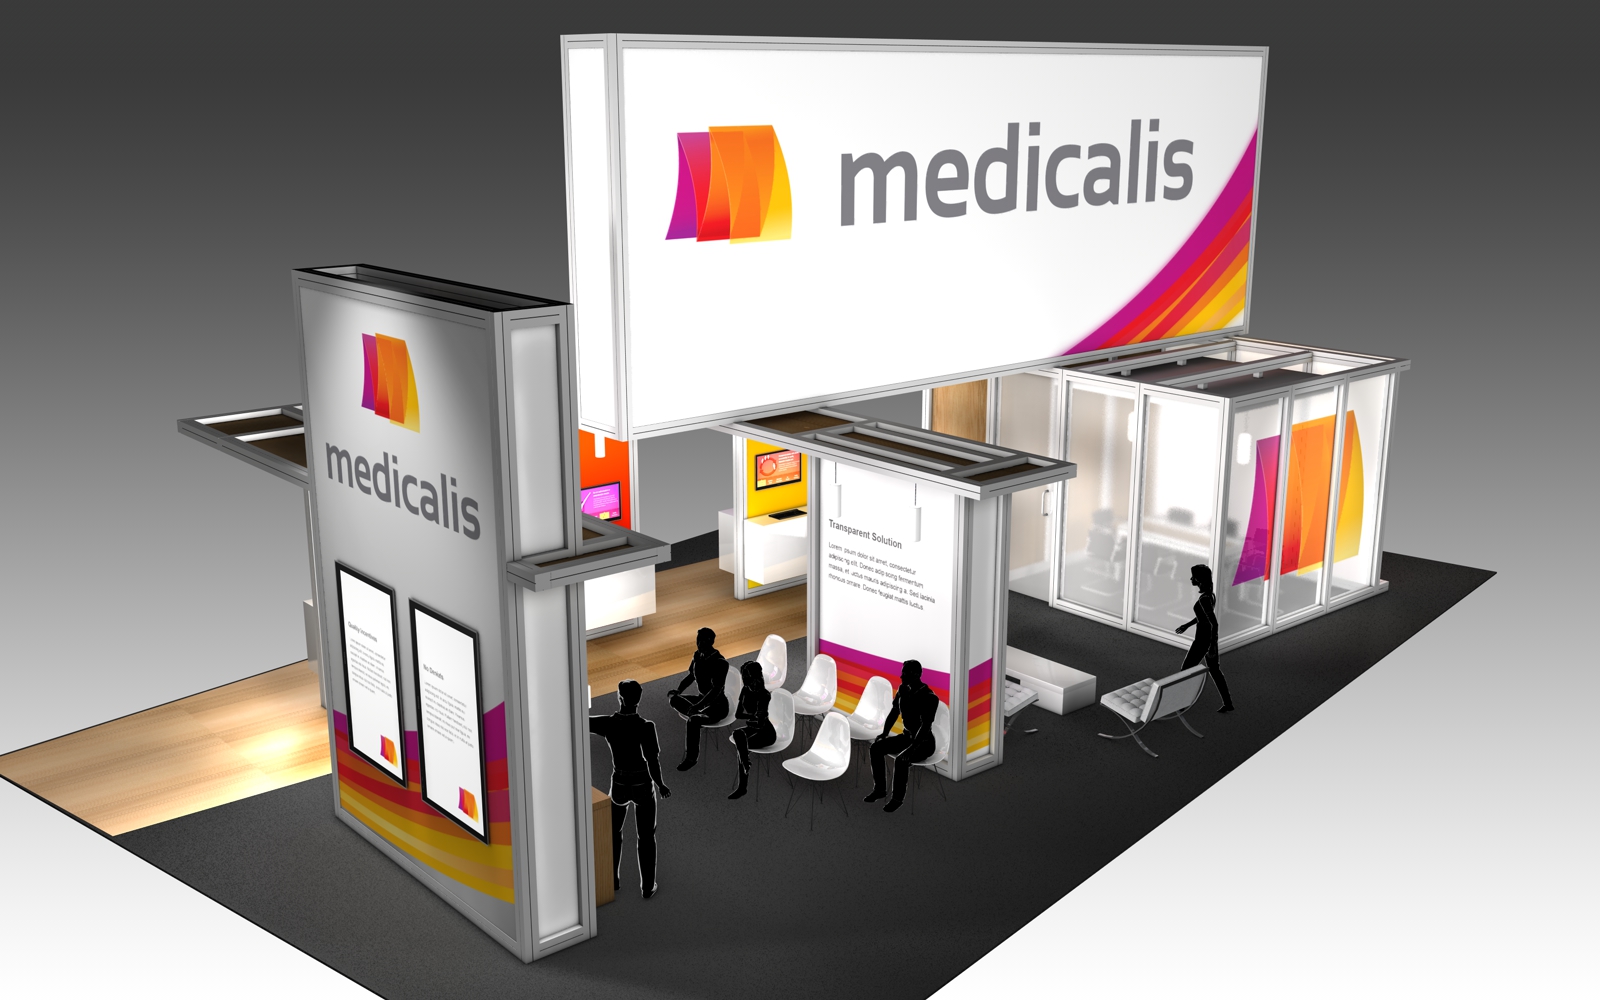 30' x 50' rental exhibit with vibrant graphics and large corporate branding for a U.S. radiology trade show